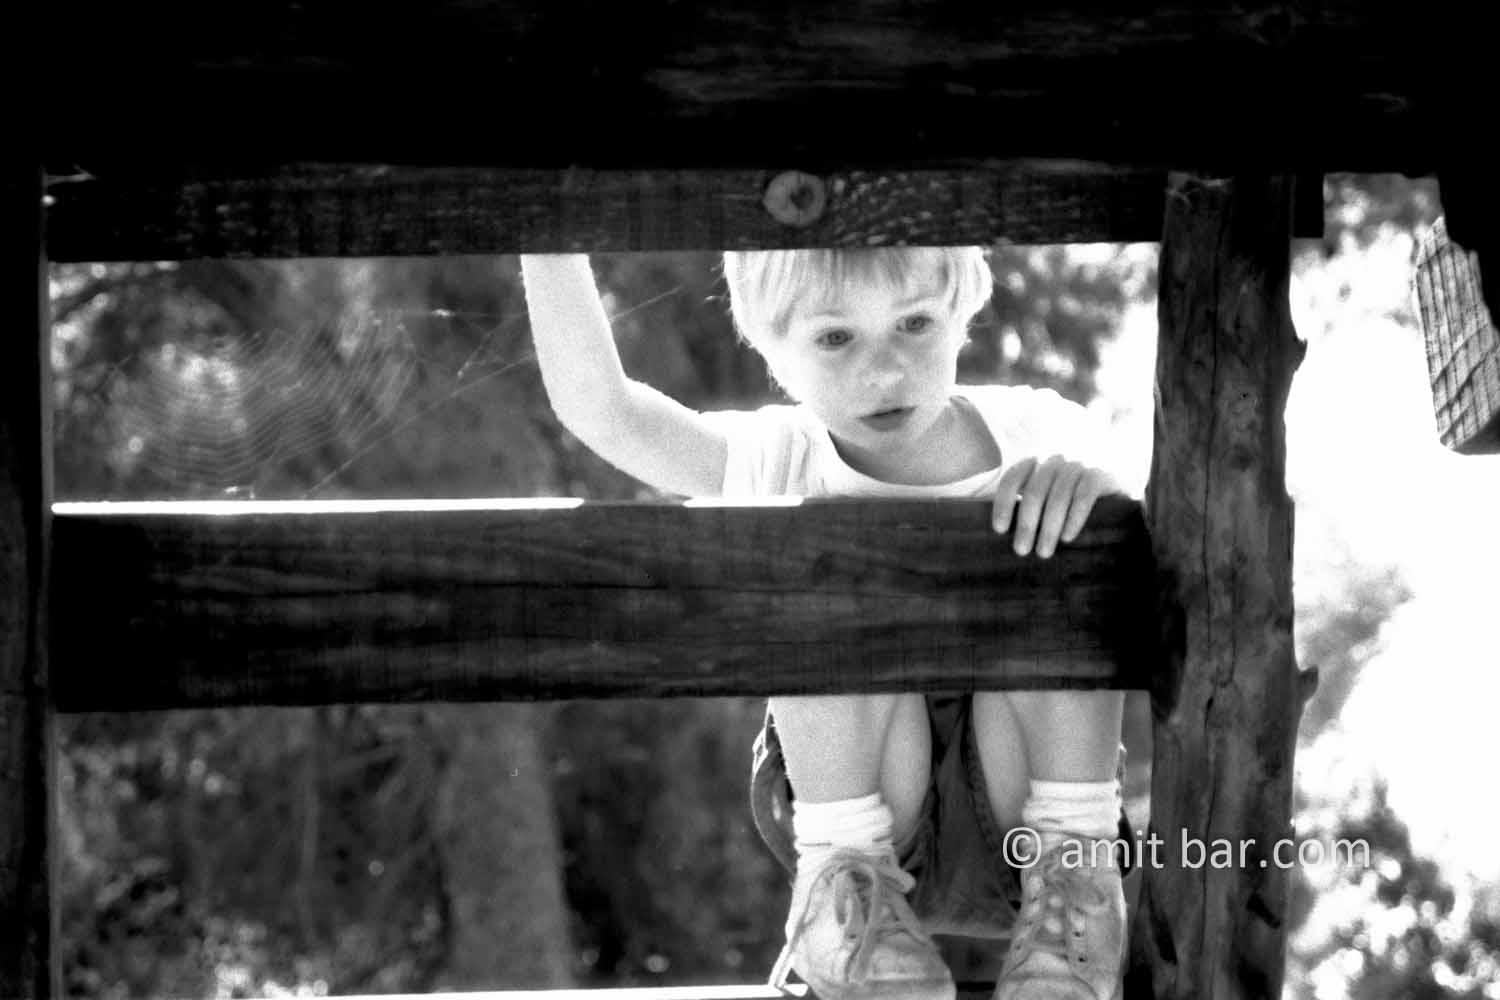 Looking from the ladder: A child is looking down from a ladder